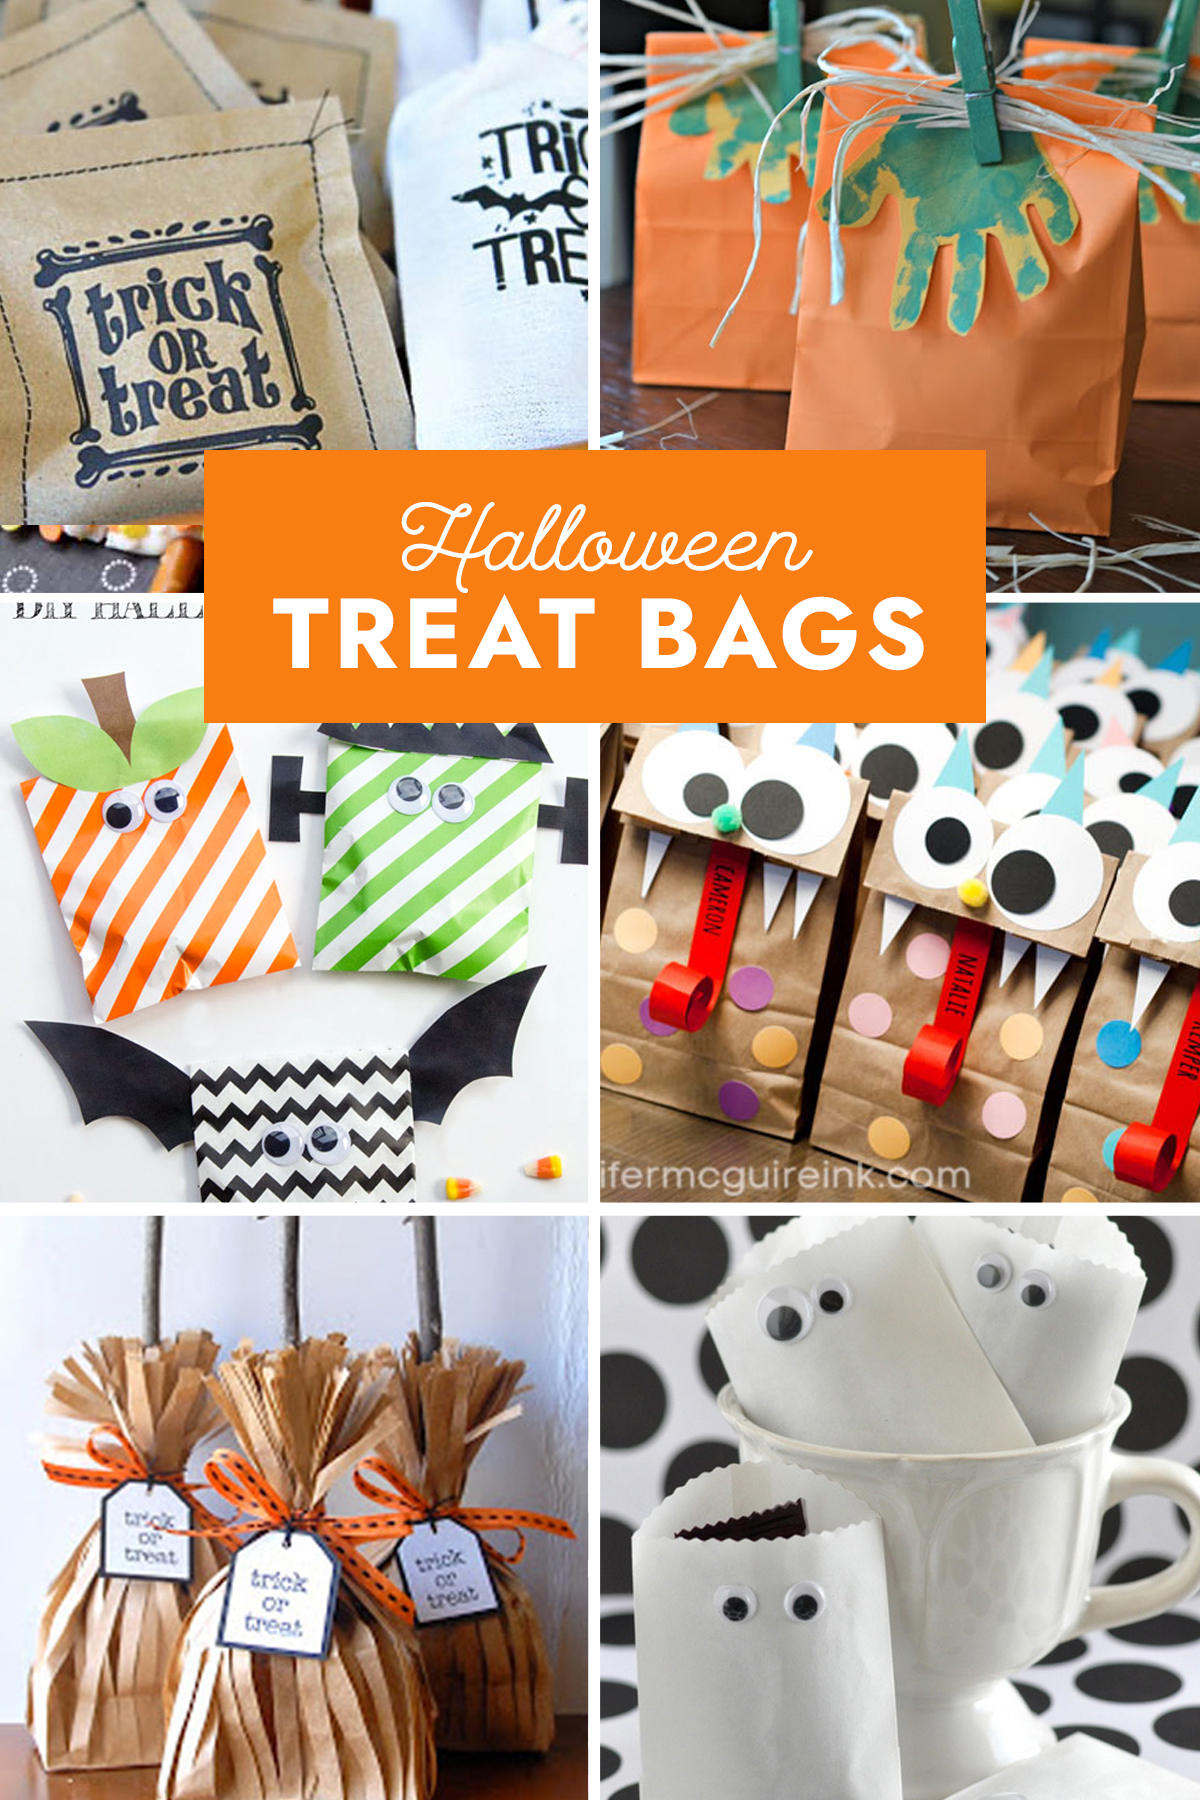 How To Make A Halloween Trick Or Treat Bag: Easy And Fun